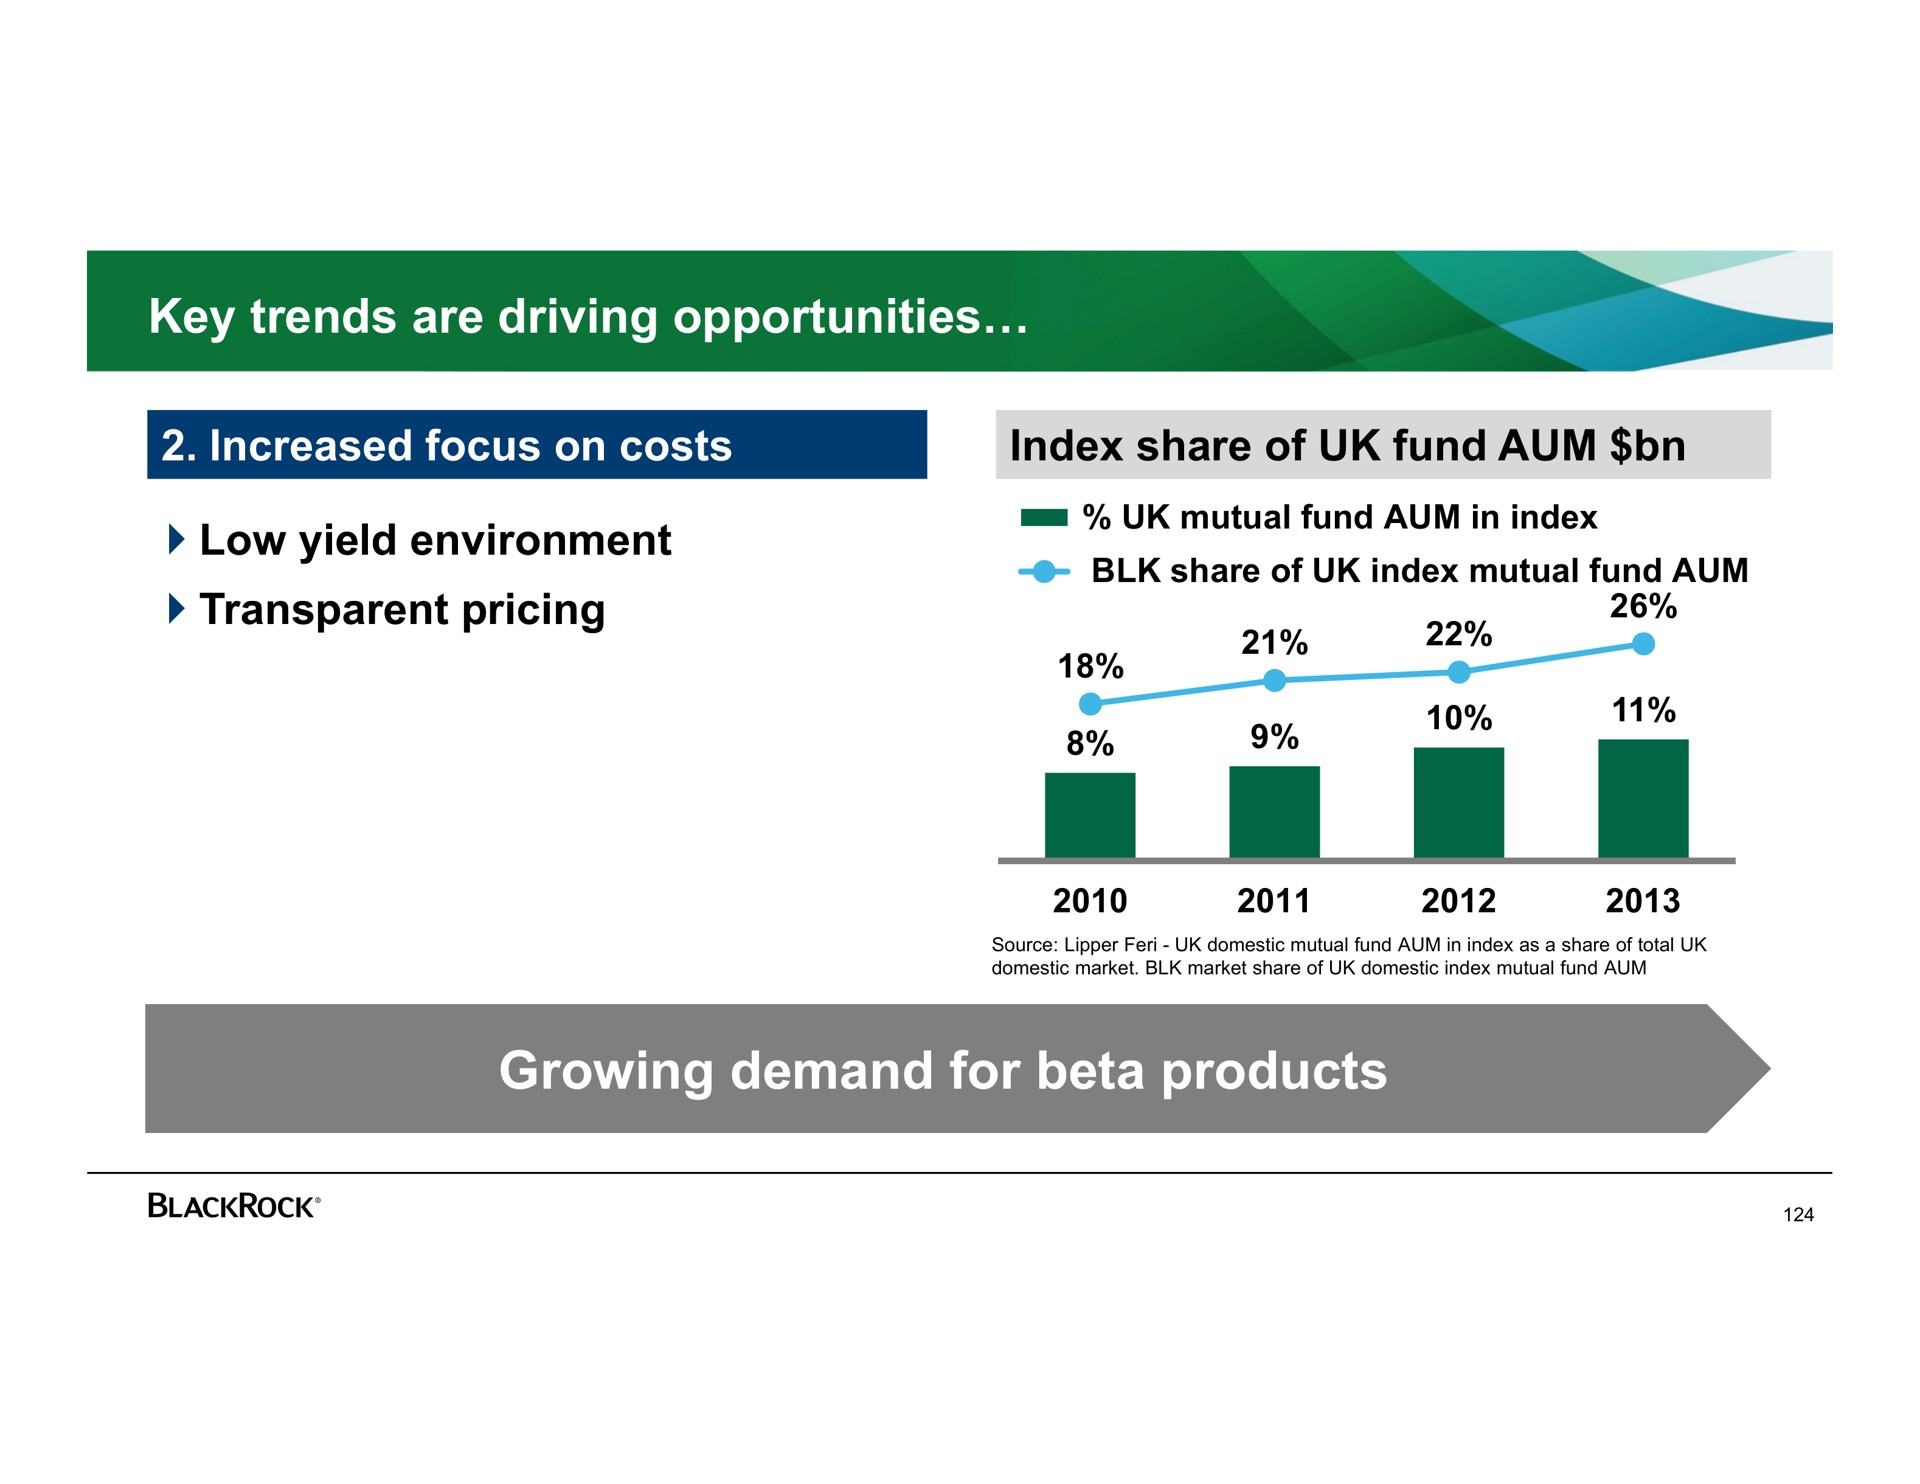 key trends are driving opportunities increased focus on costs index share of fund aum low yield environment transparent pricing growing demand for beta products | BlackRock